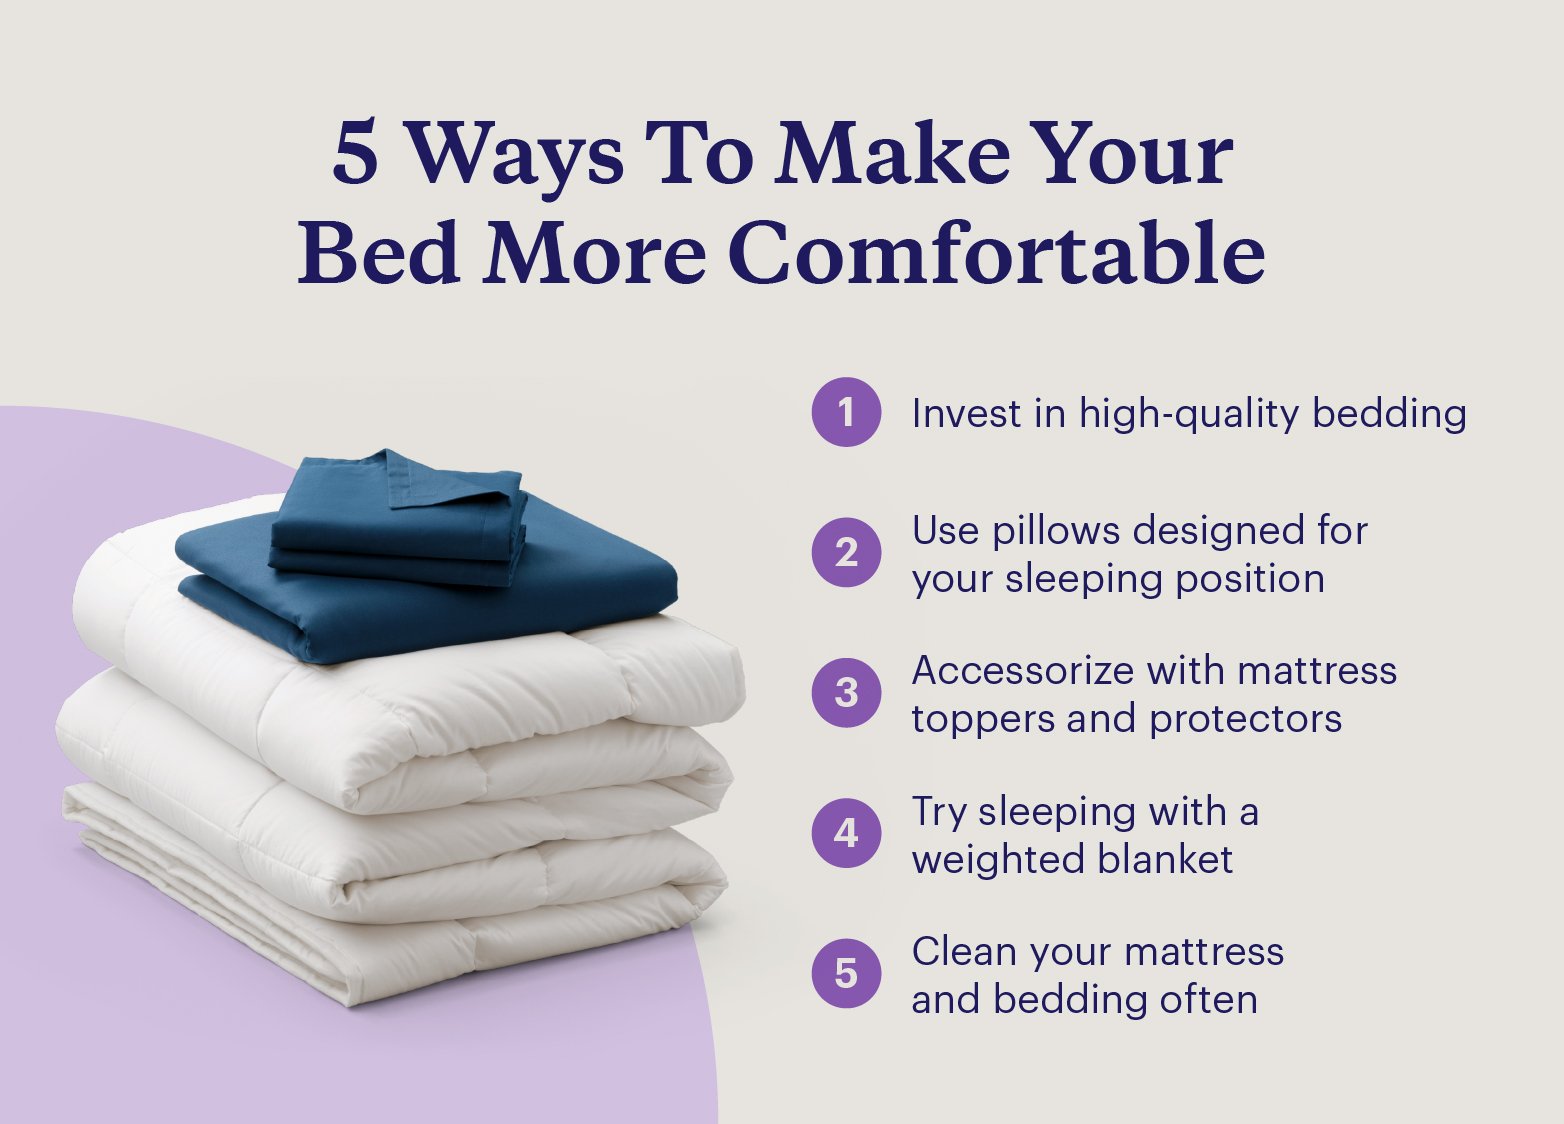 Five ways to make your bed more comfortable with mattress accessories.